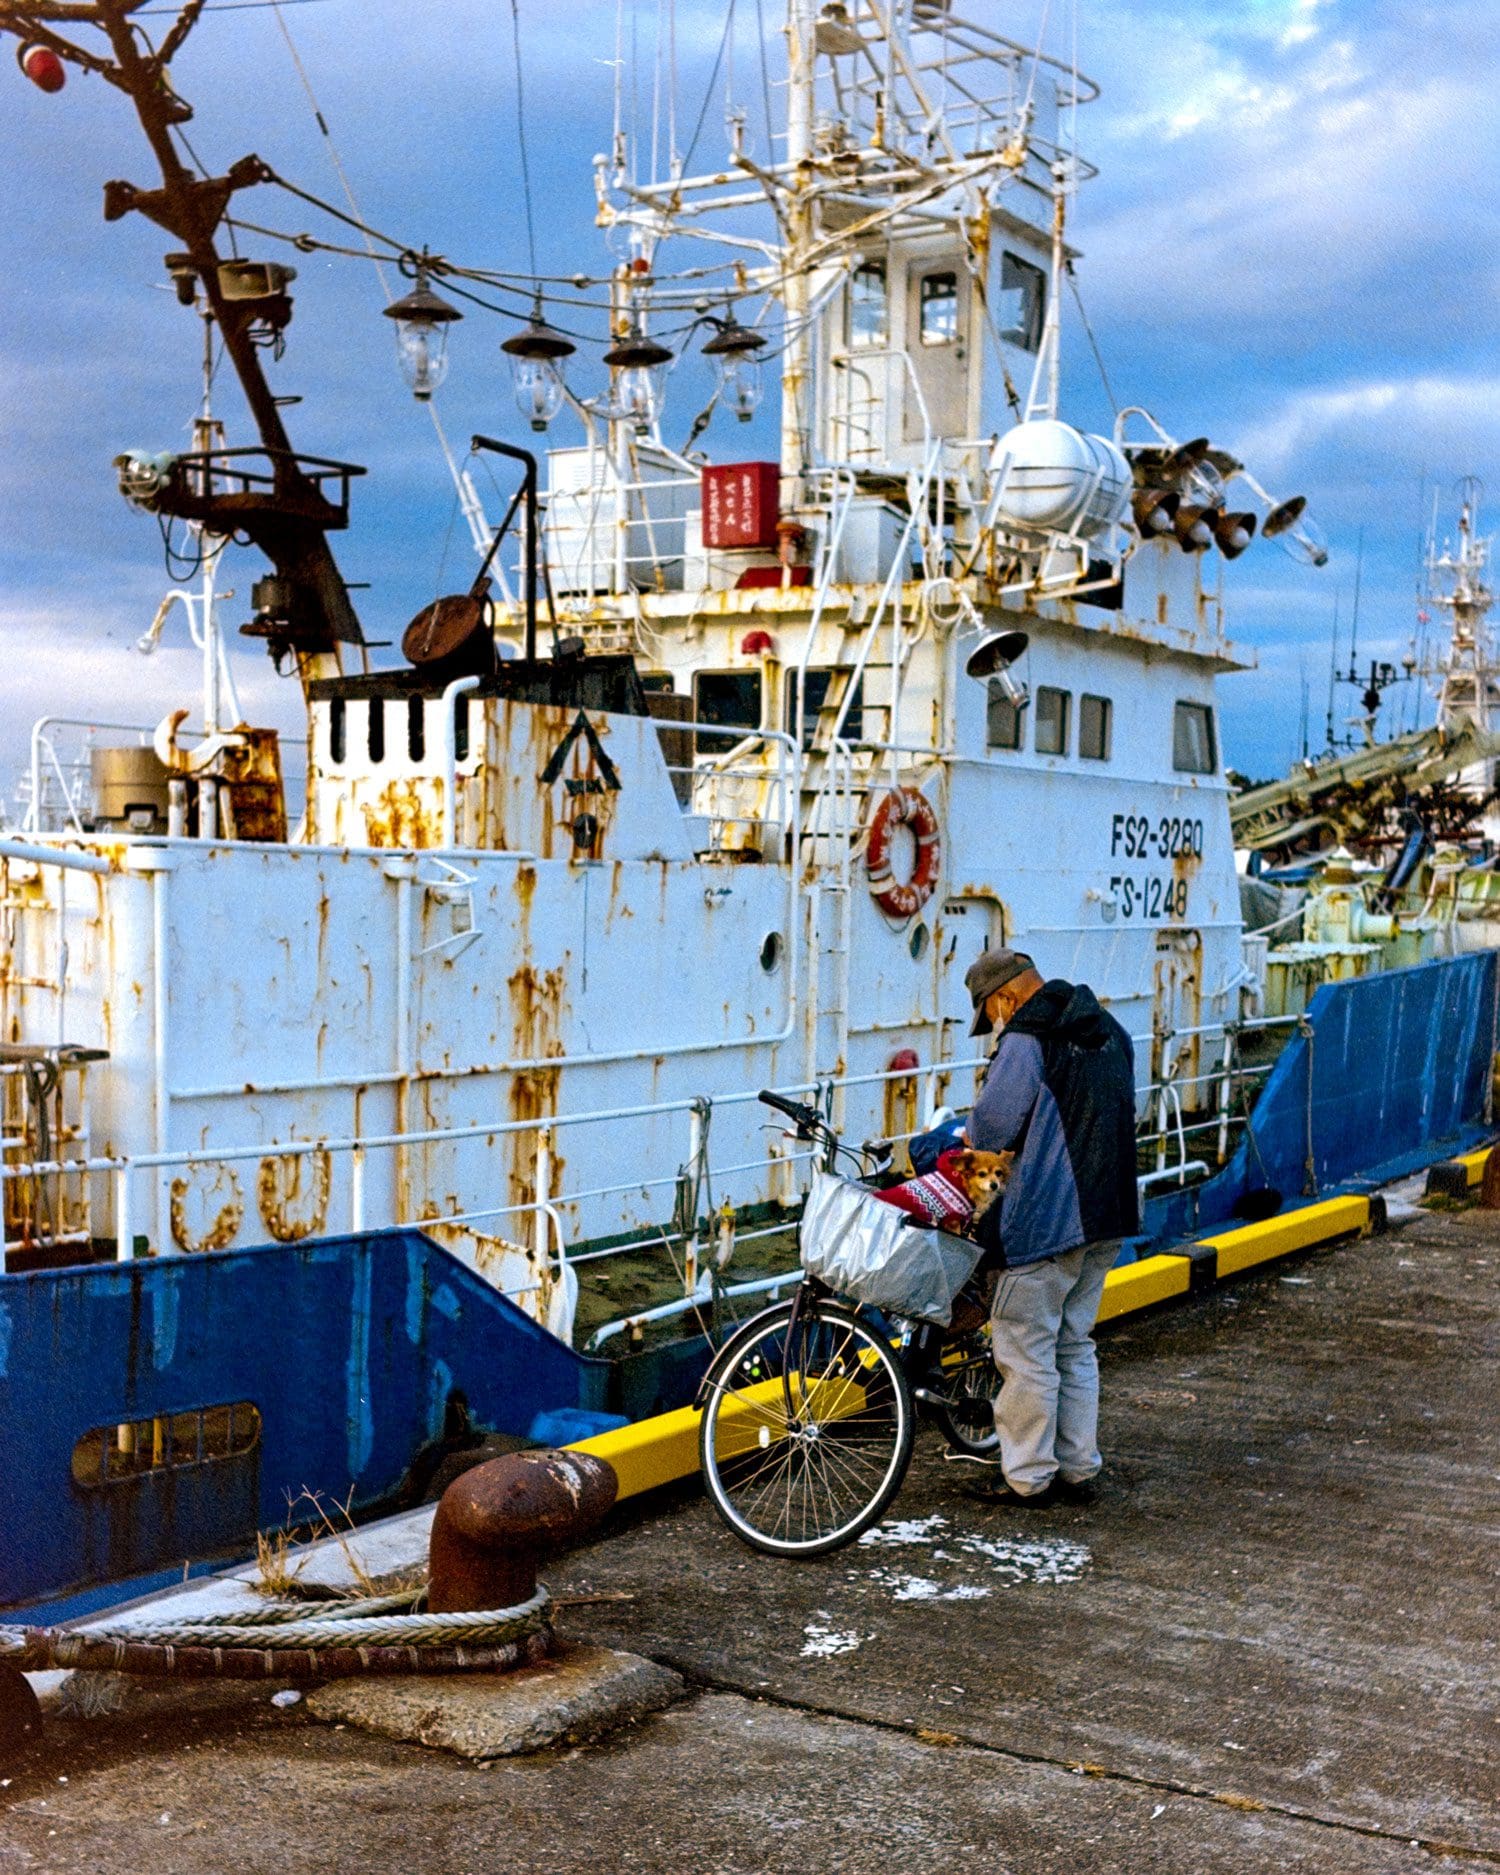 A man and his dog on a harbor dock with industry-grade fishing vessel backdrop under dramatic sky.